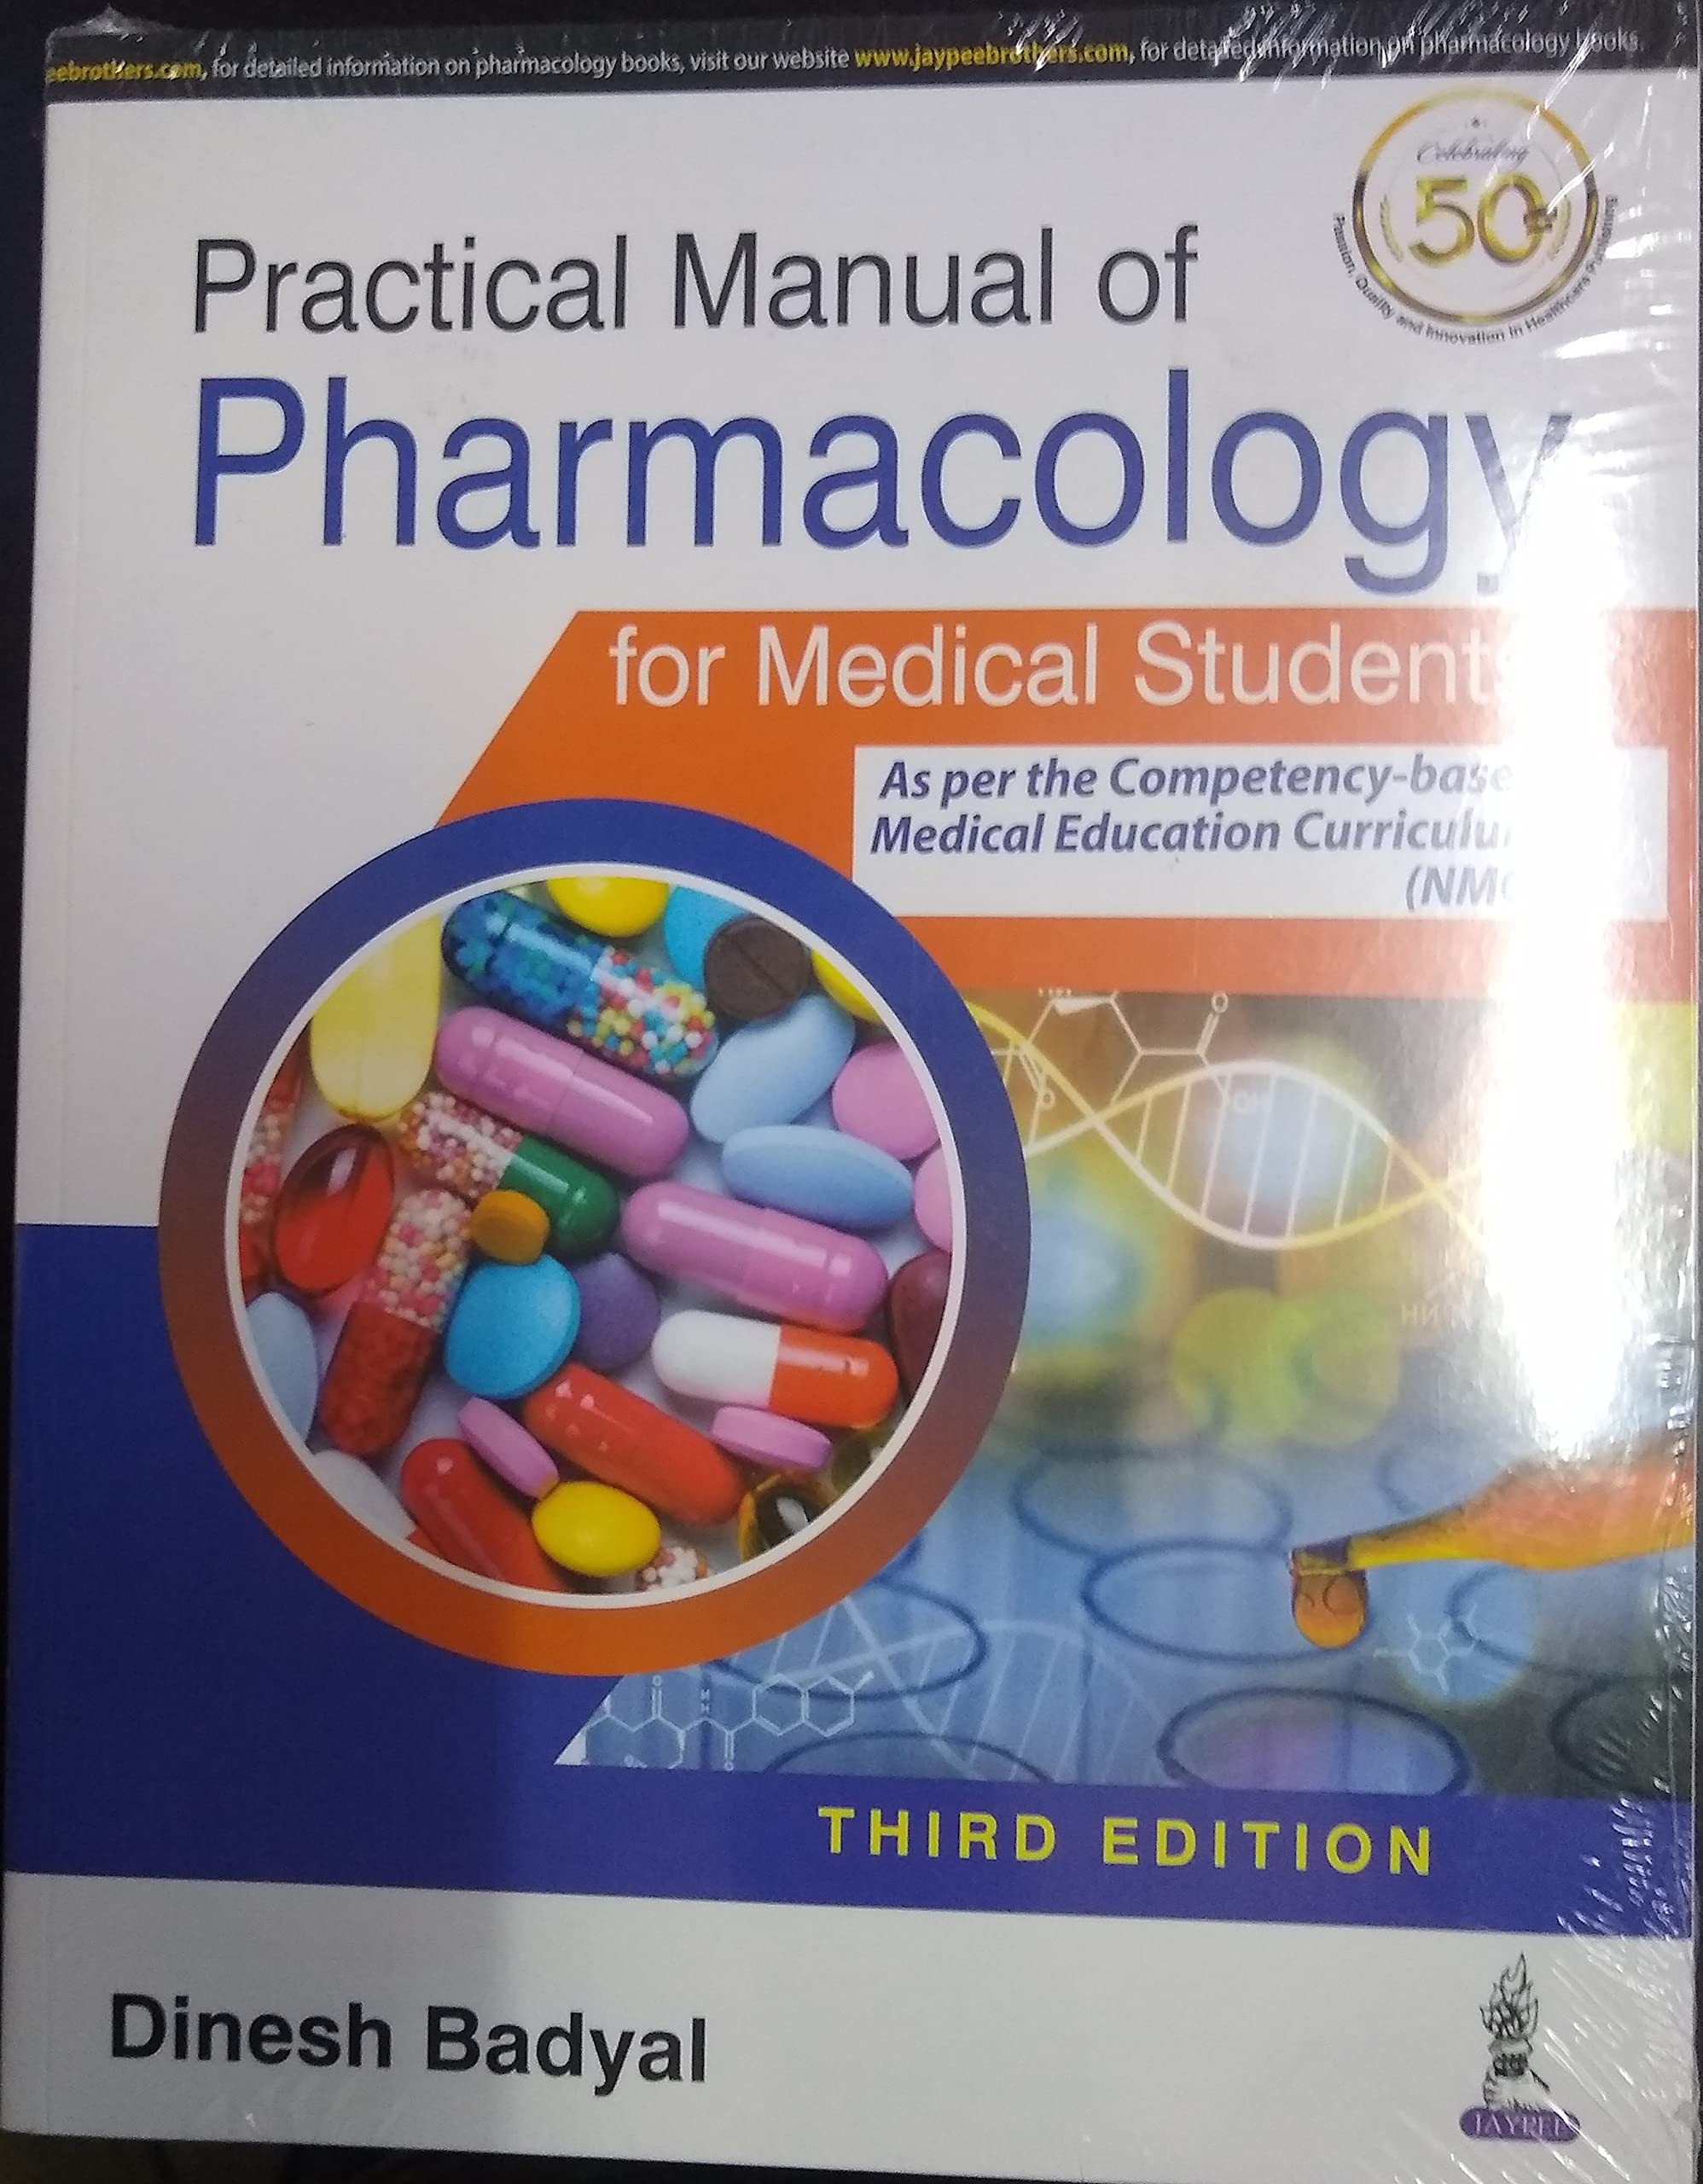 Practical Manual Of Pharmacology For Medical Student